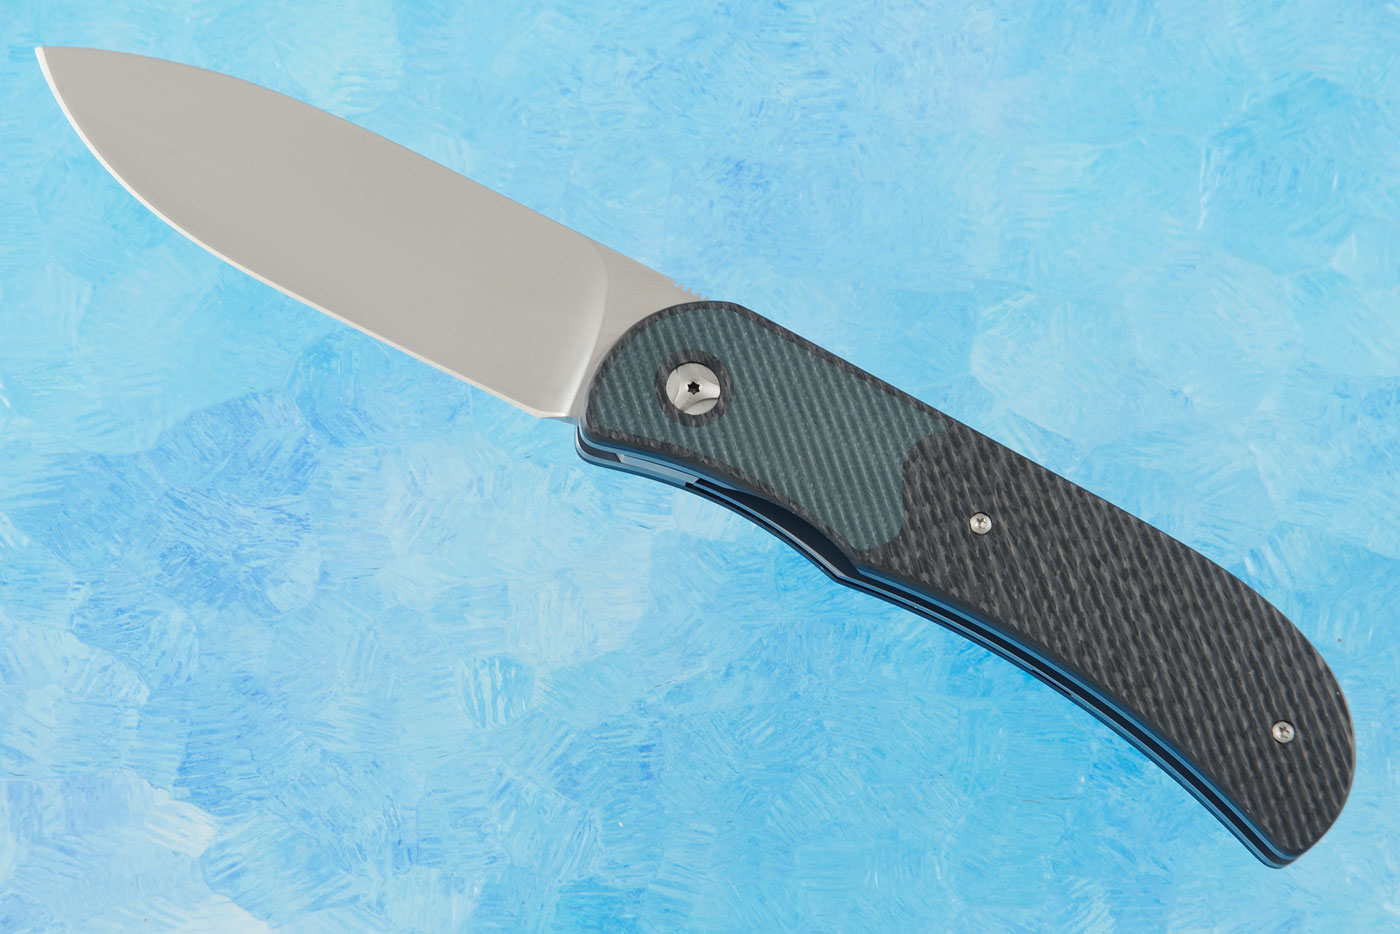 LEXK Plus Front Flipper with Carbon Fiber and Green G10 (Ceramic IKBS)